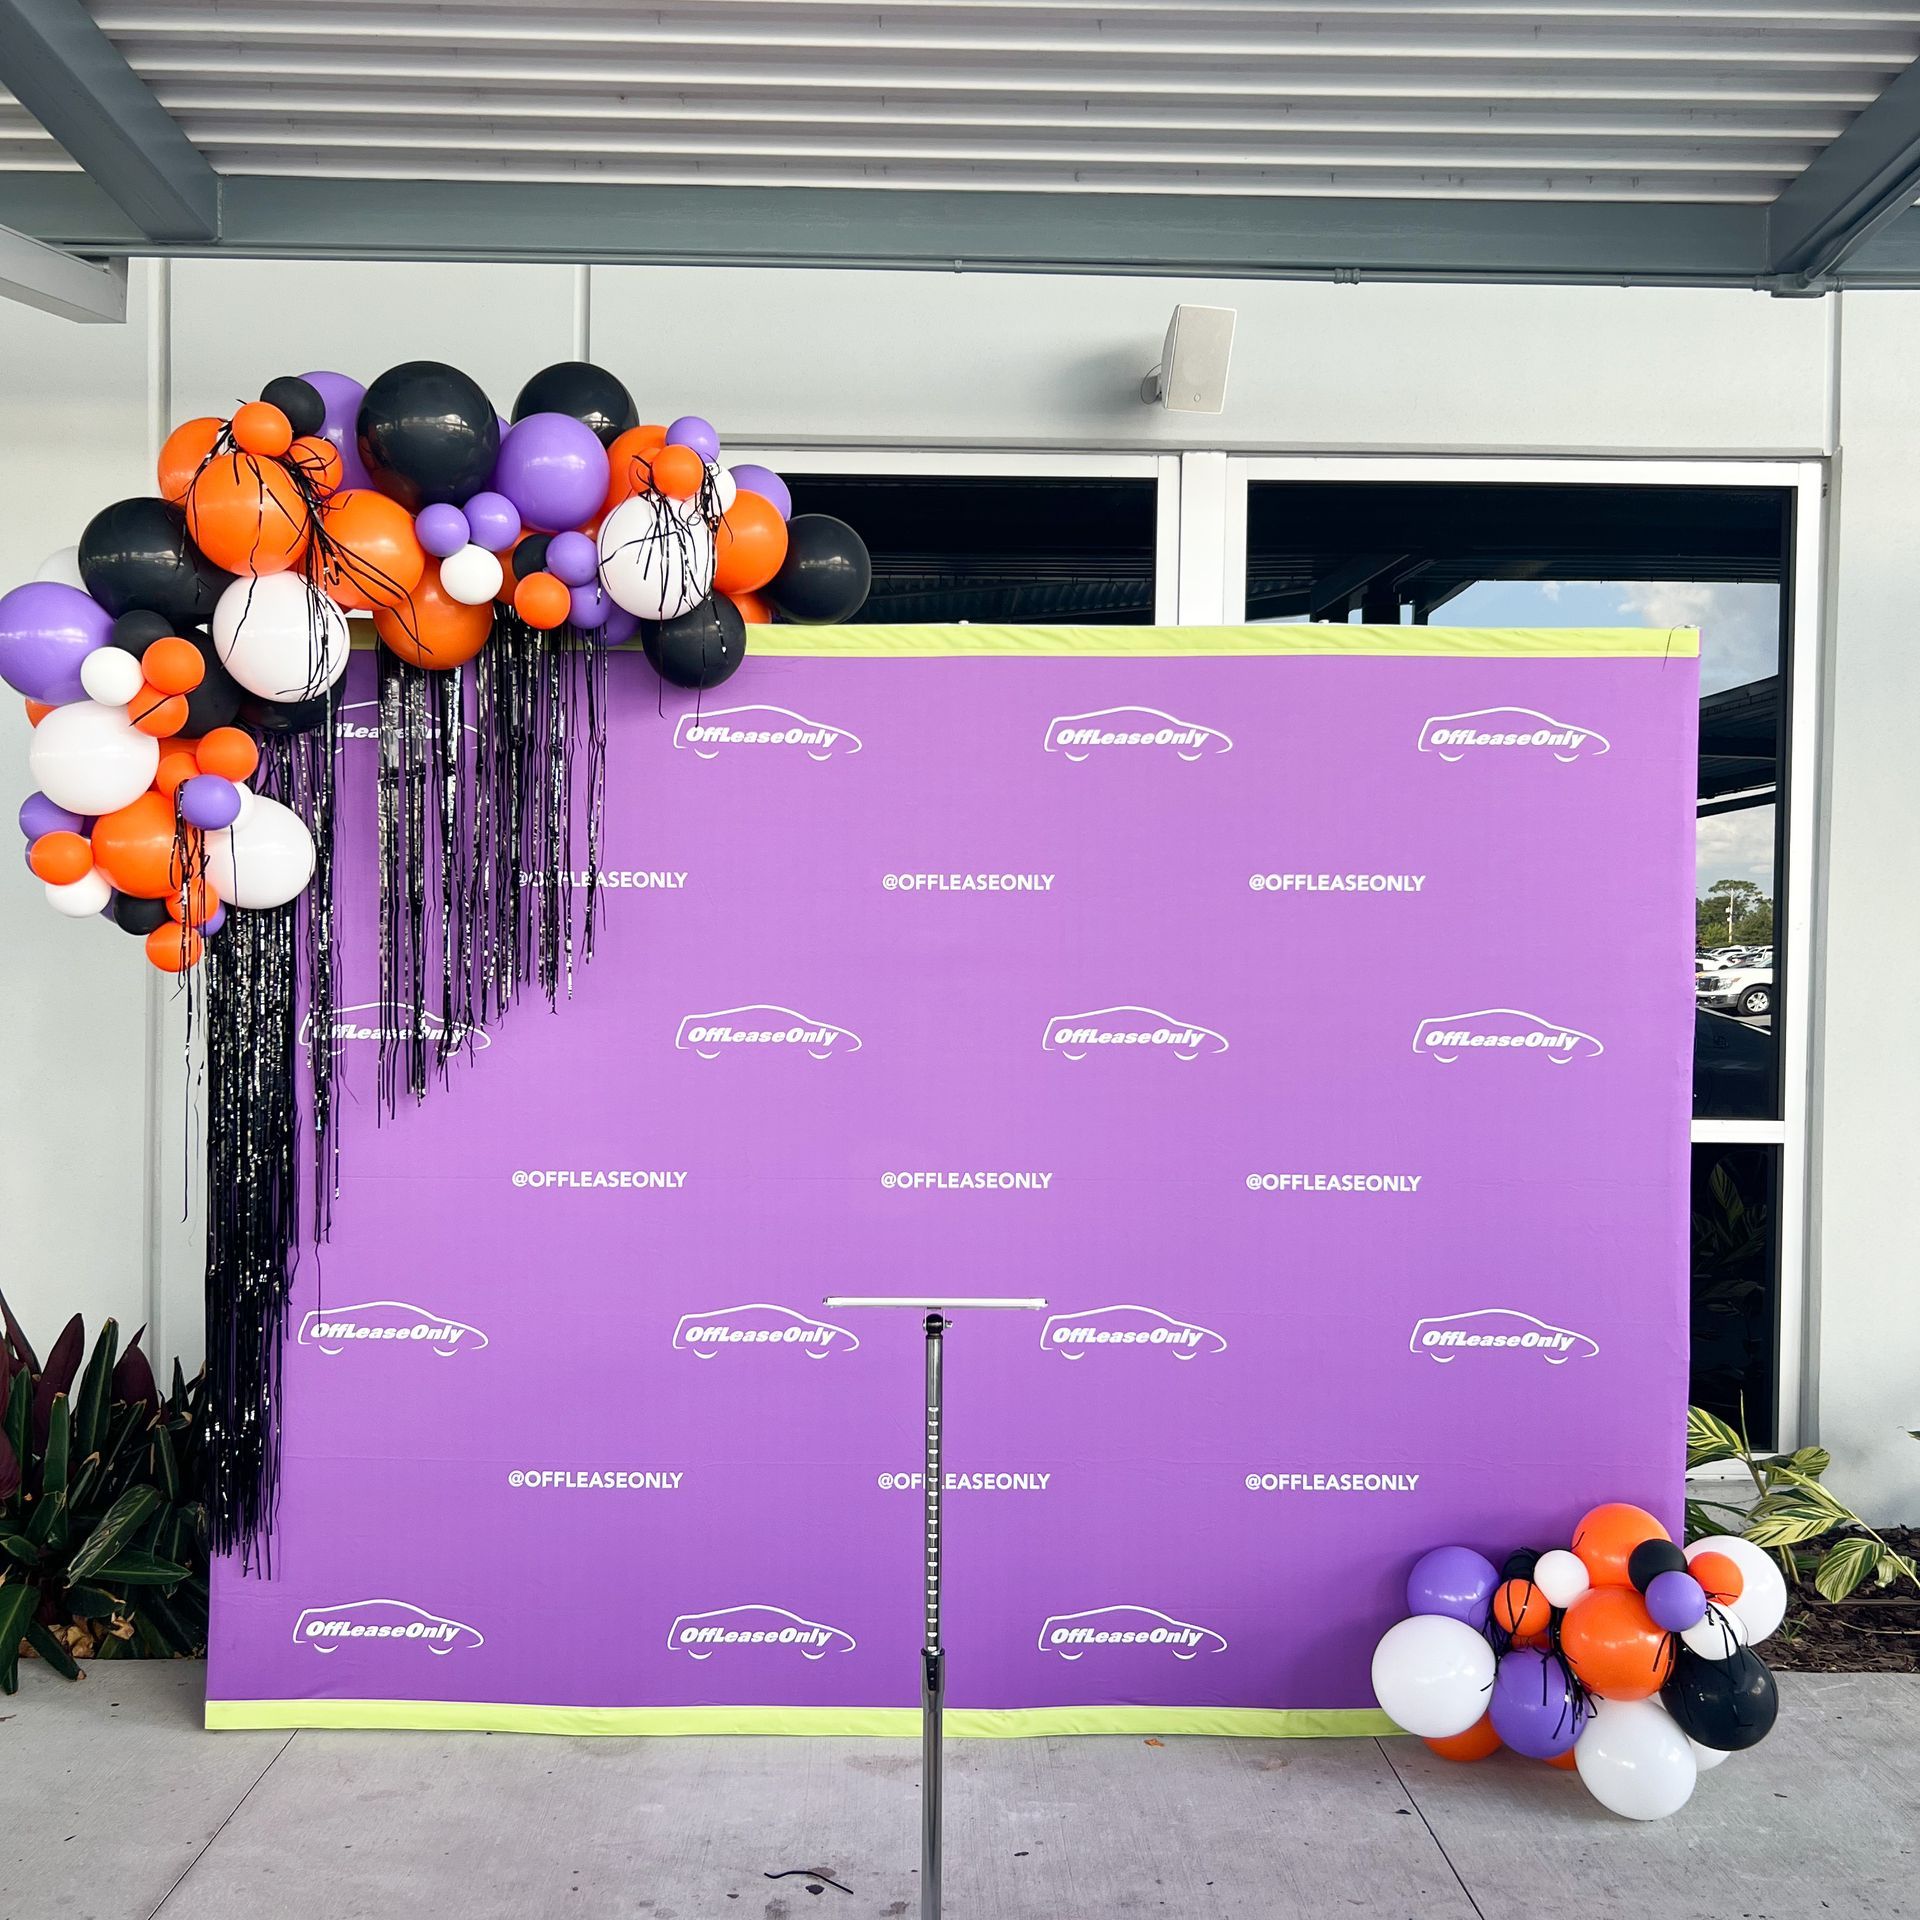 A purple backdrop with balloons and tinsel on it